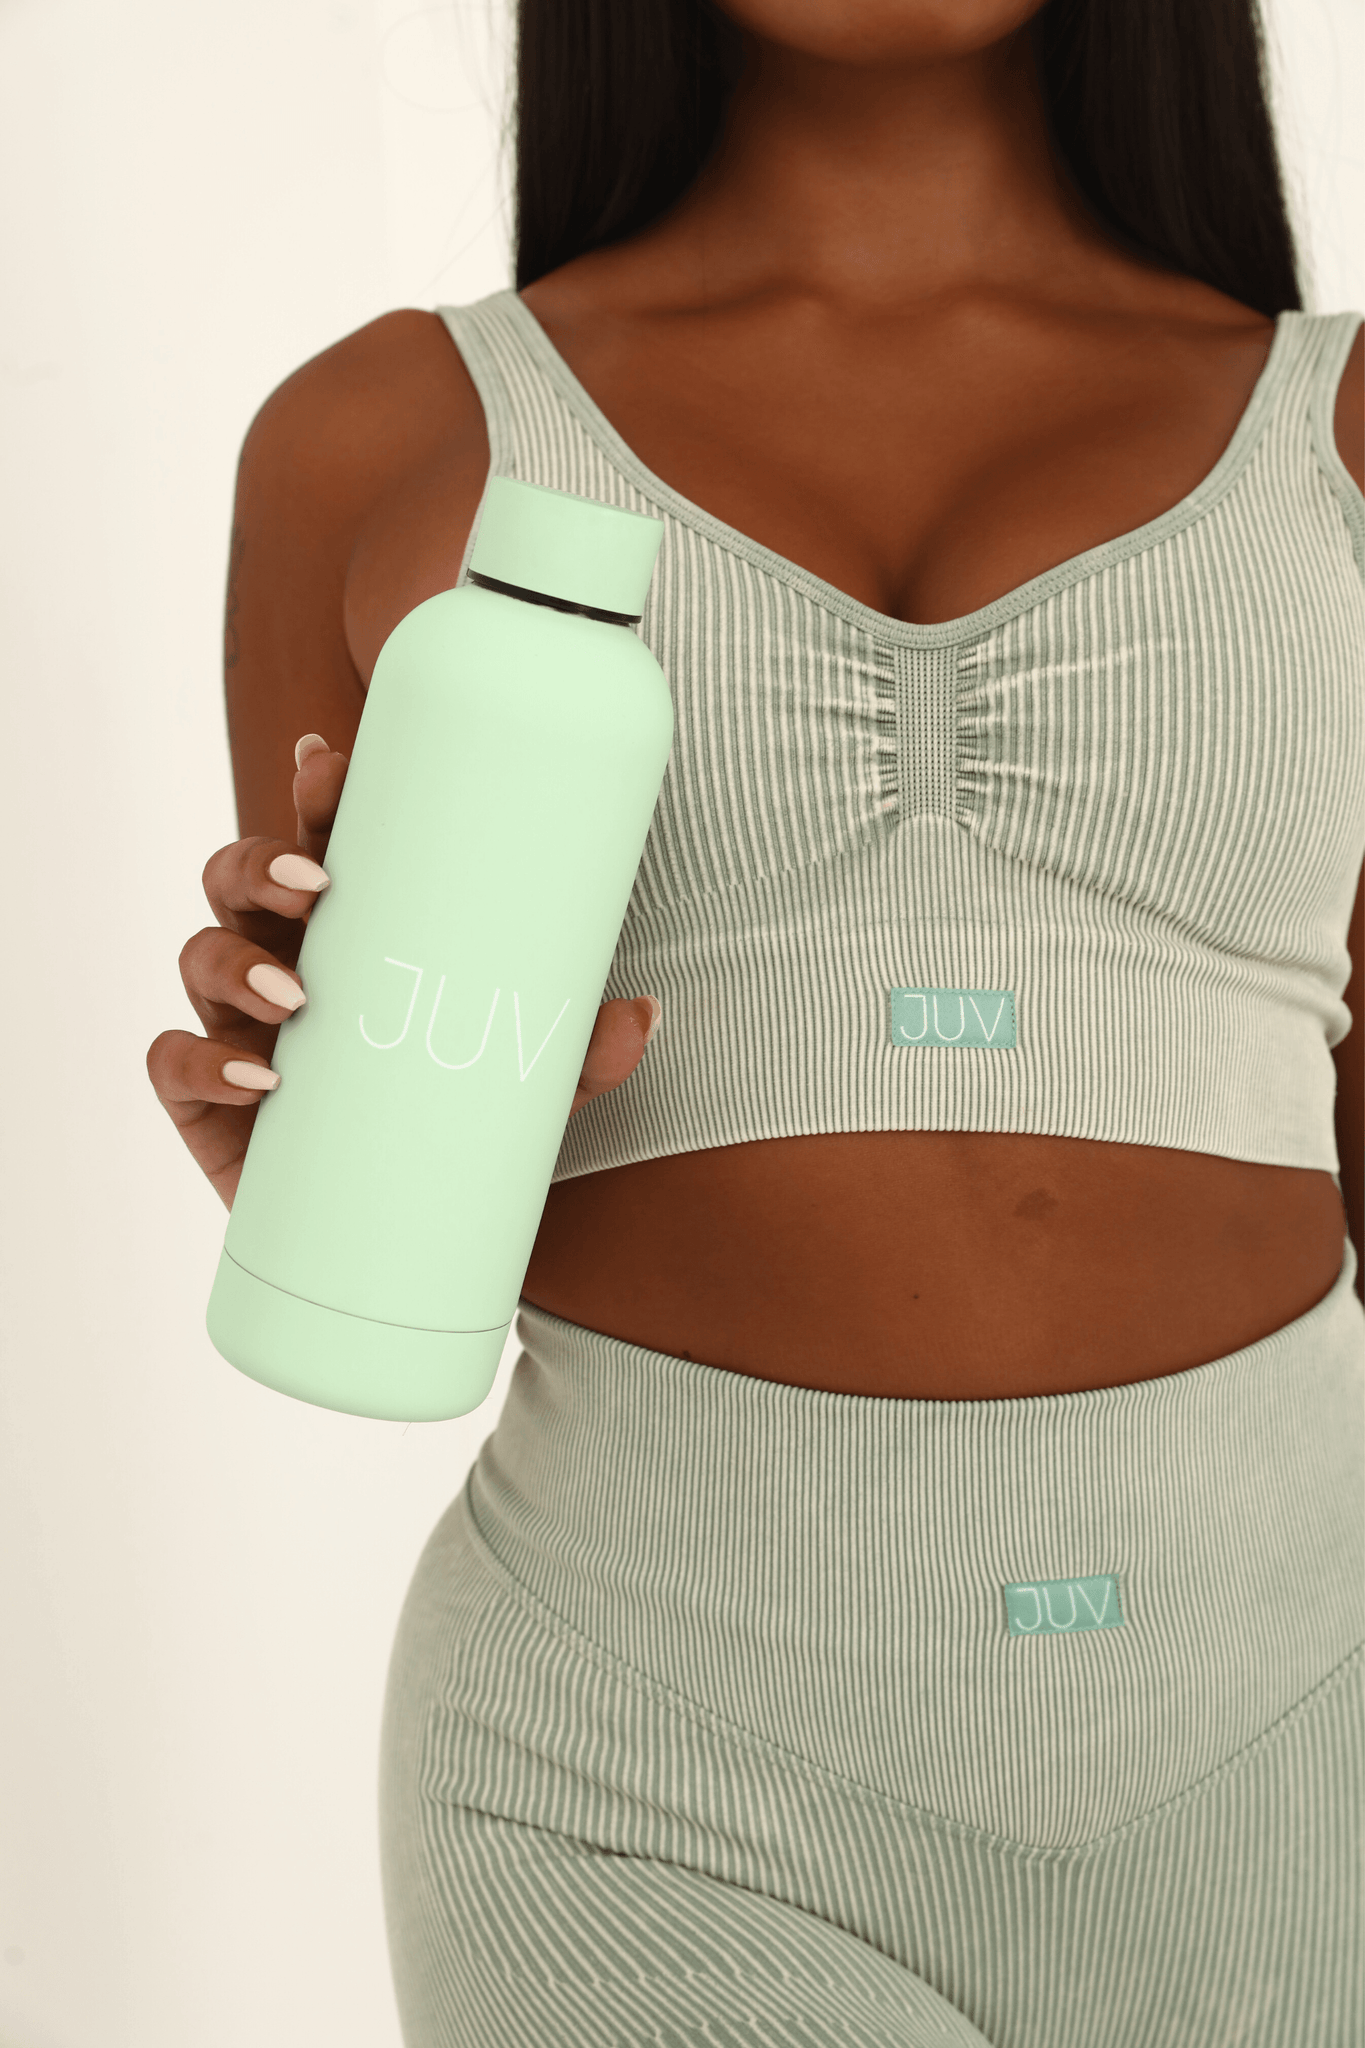 JUV mia thermal bottle in mint green, close up front view in the model hands.